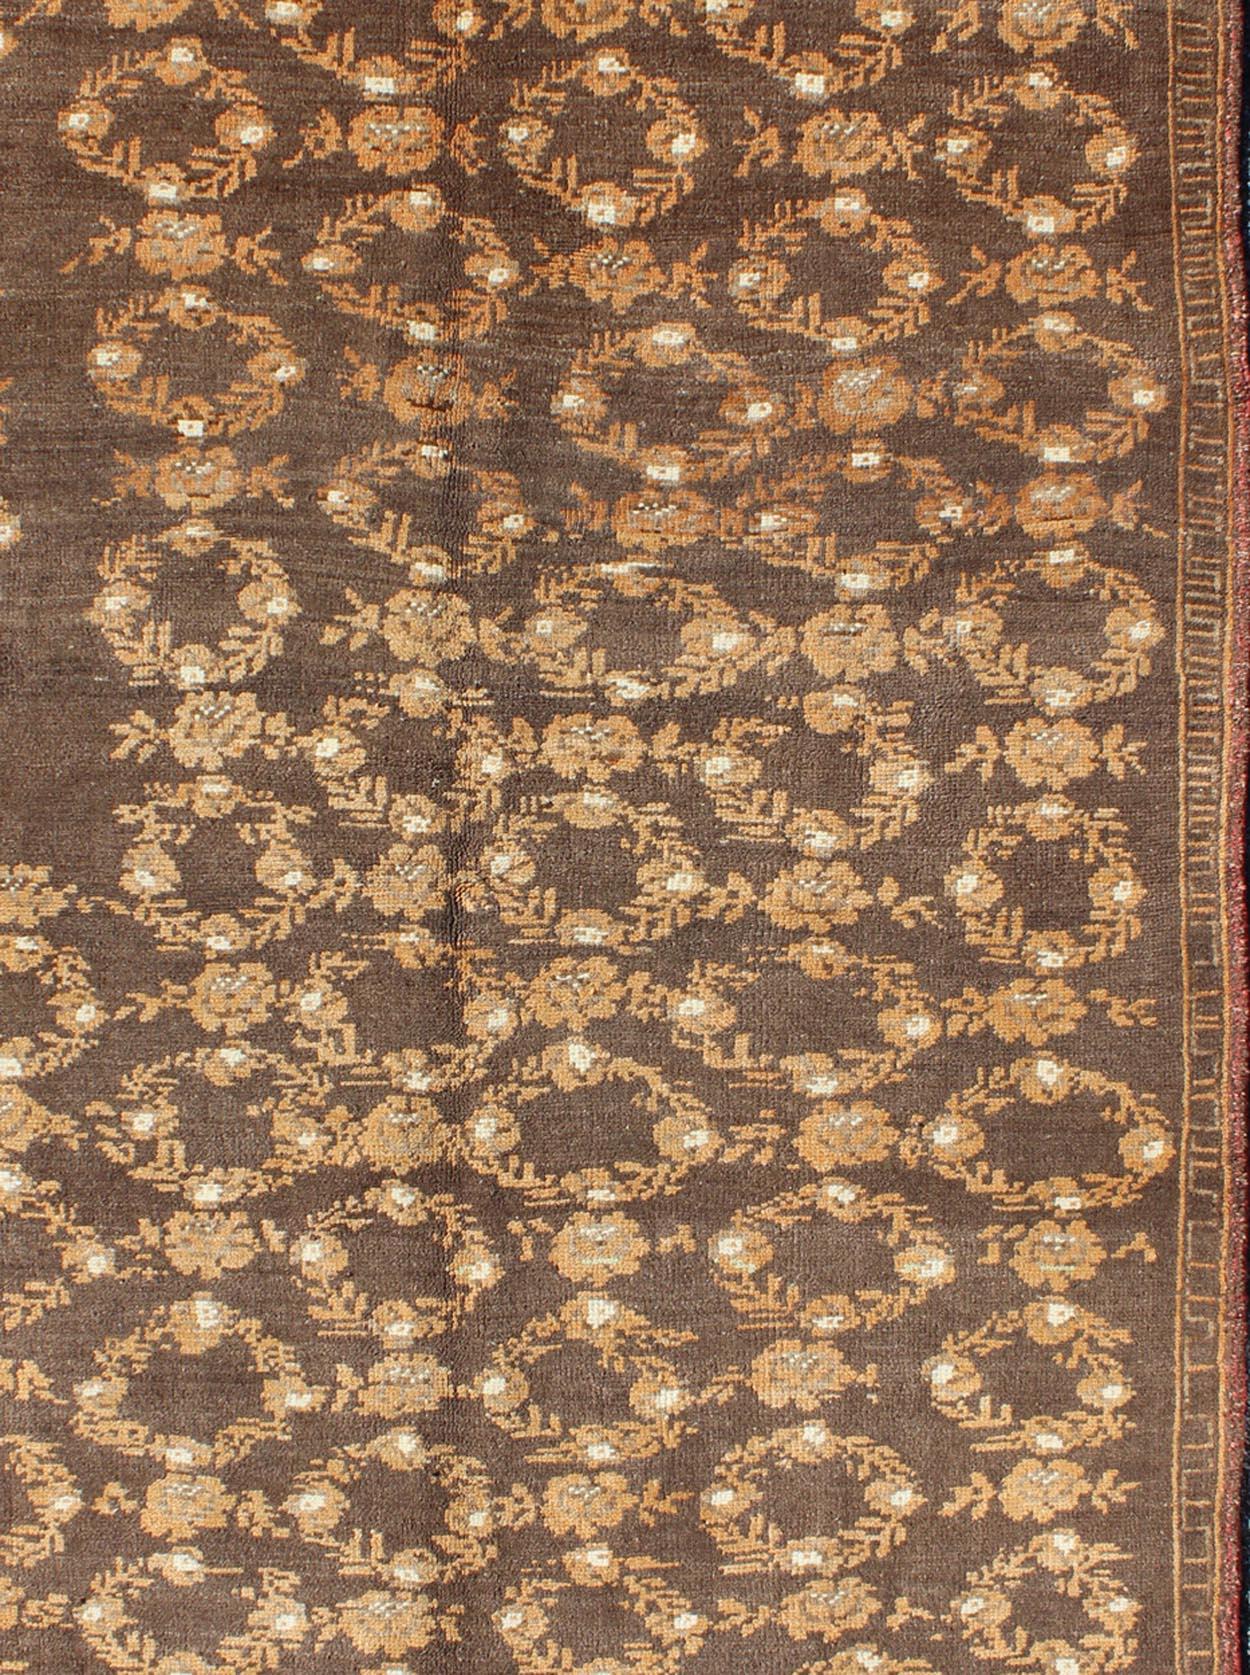 Measures: 4'5 x 7'4

The design of this beautiful vintage Oushak rug from mid-20th century Turkey is enhanced by its lustrous wool. The brown ground is home to an all-over tan wreath design decorated with wreath and flowers. A border of line